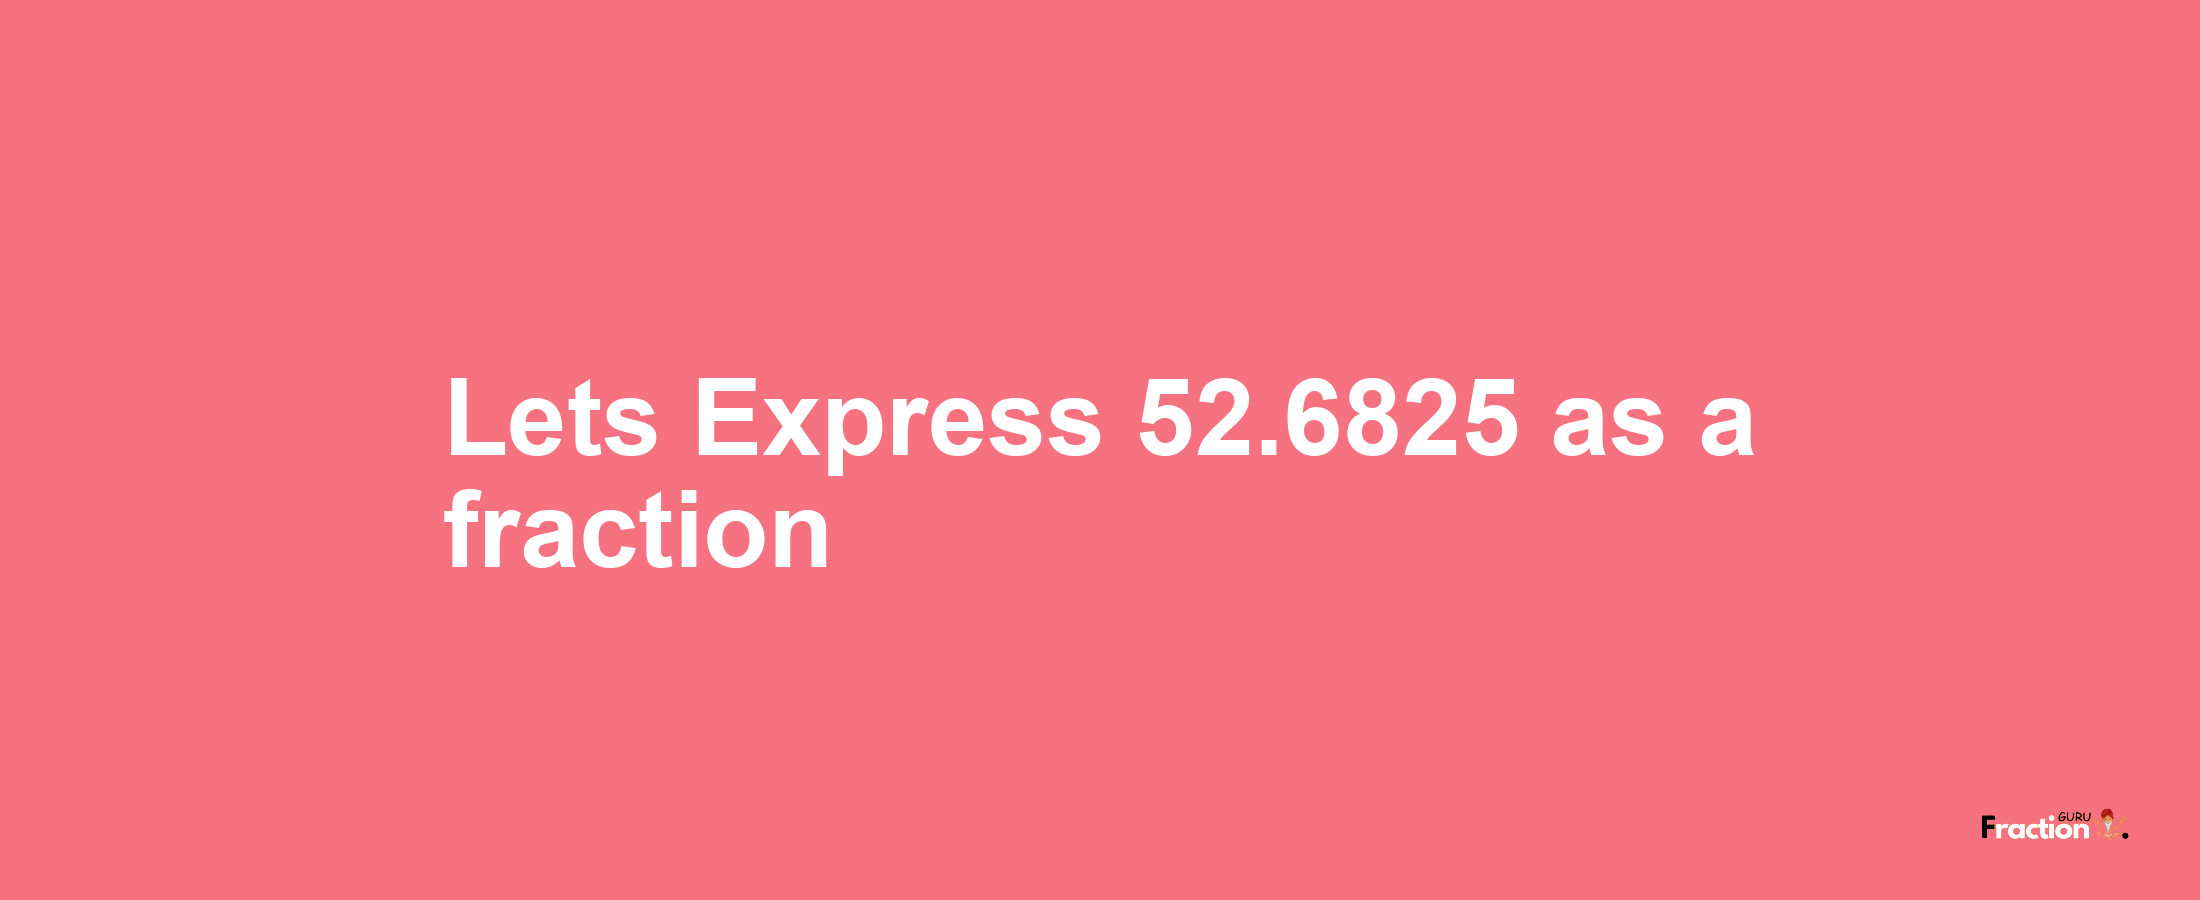 Lets Express 52.6825 as afraction